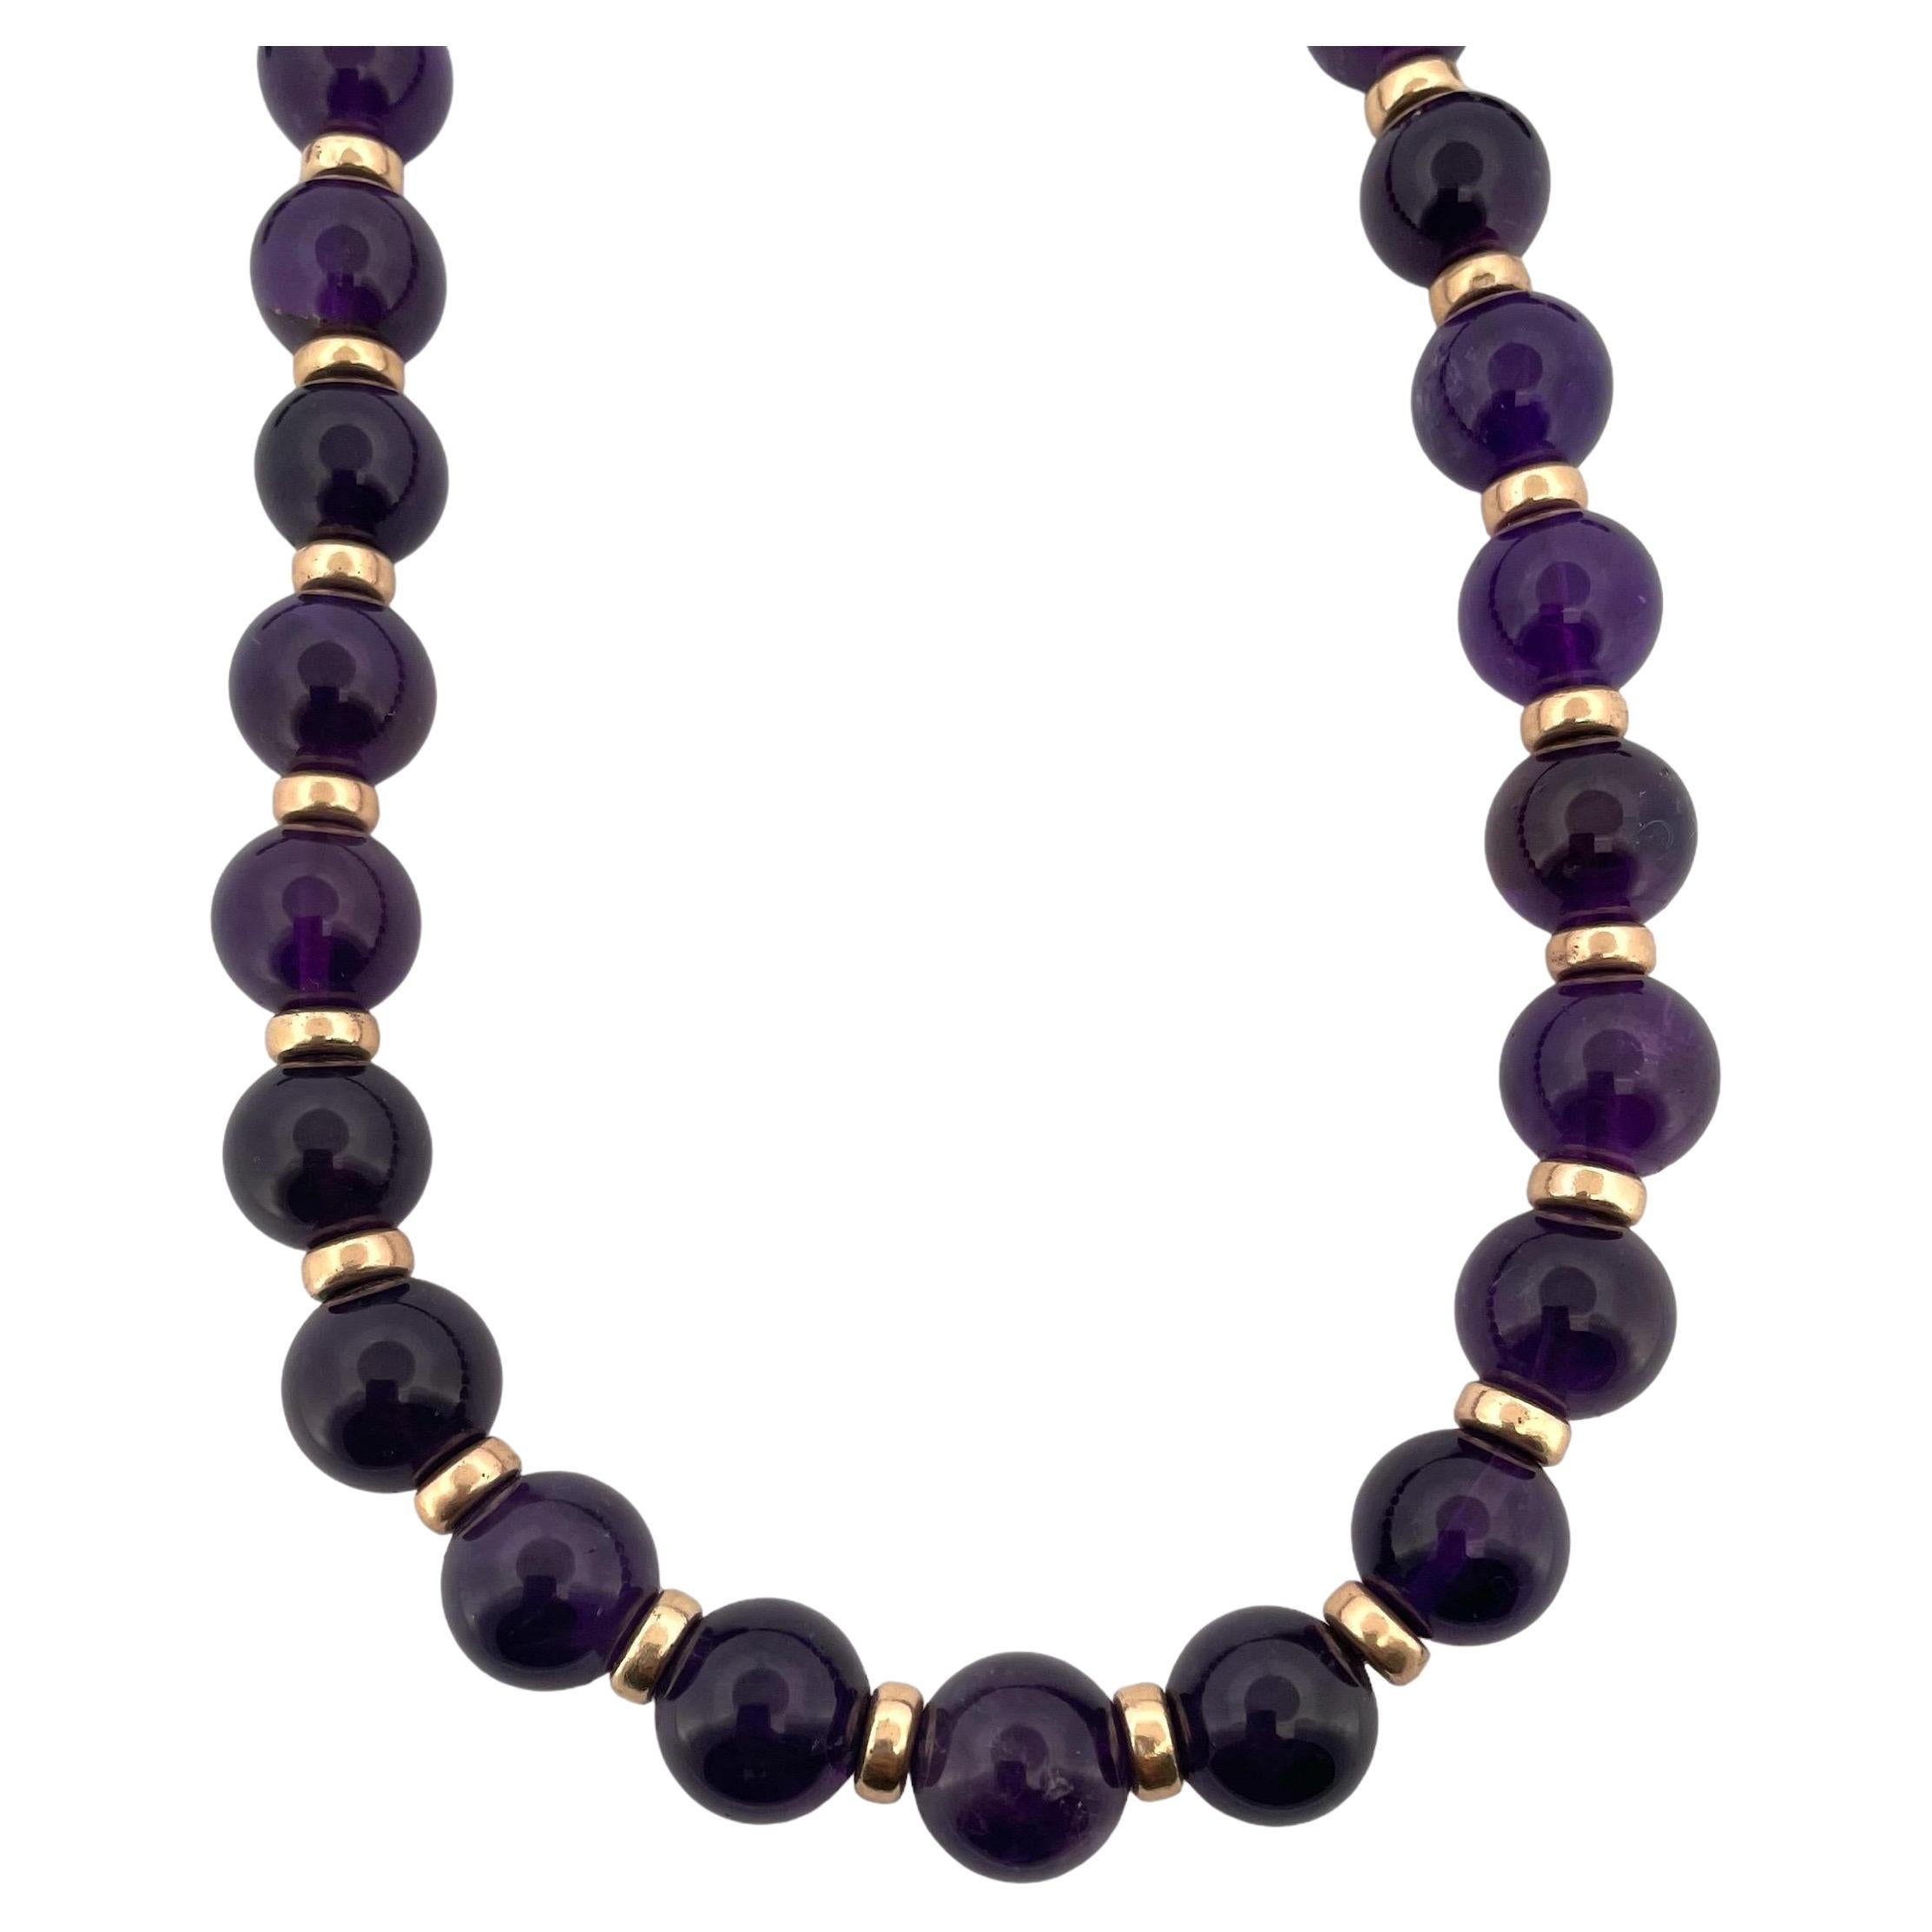 Elegant 14K Yellow Gold Necklace with Amethyst Beads & Spacers For Sale